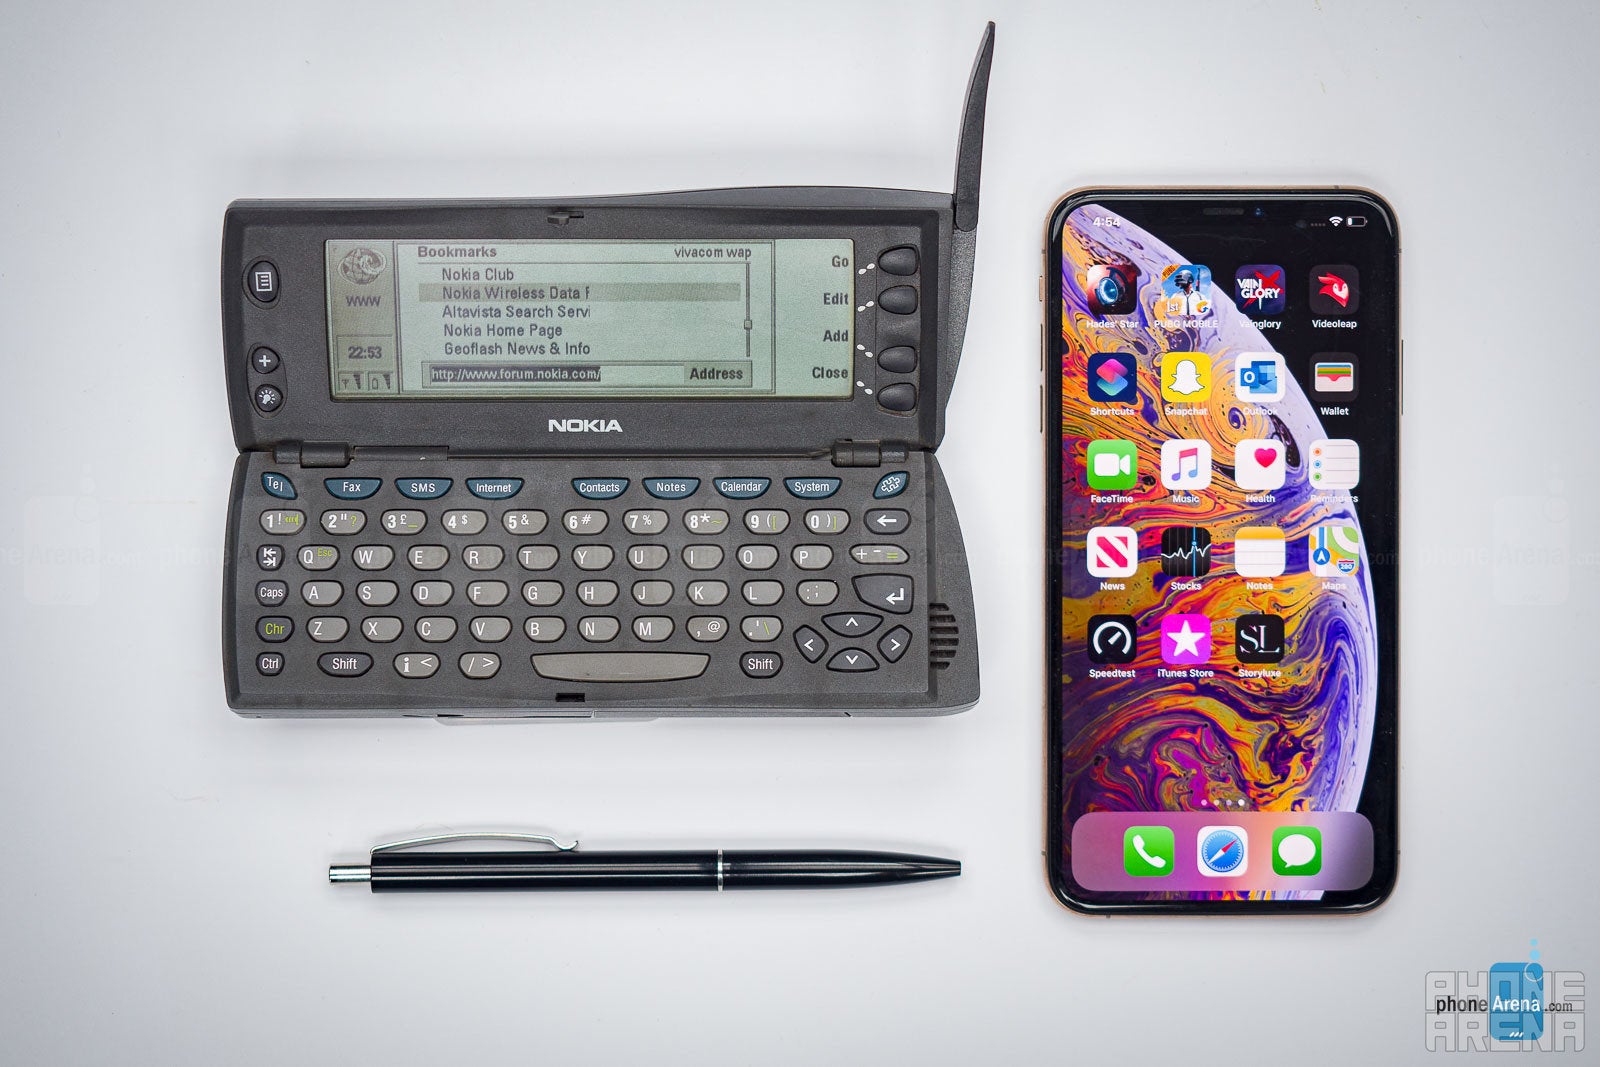 A Nokia 9110i Communicator next to an iPhone XS Max - 21 years ago, this was the smartphone of the future – and I just bought one